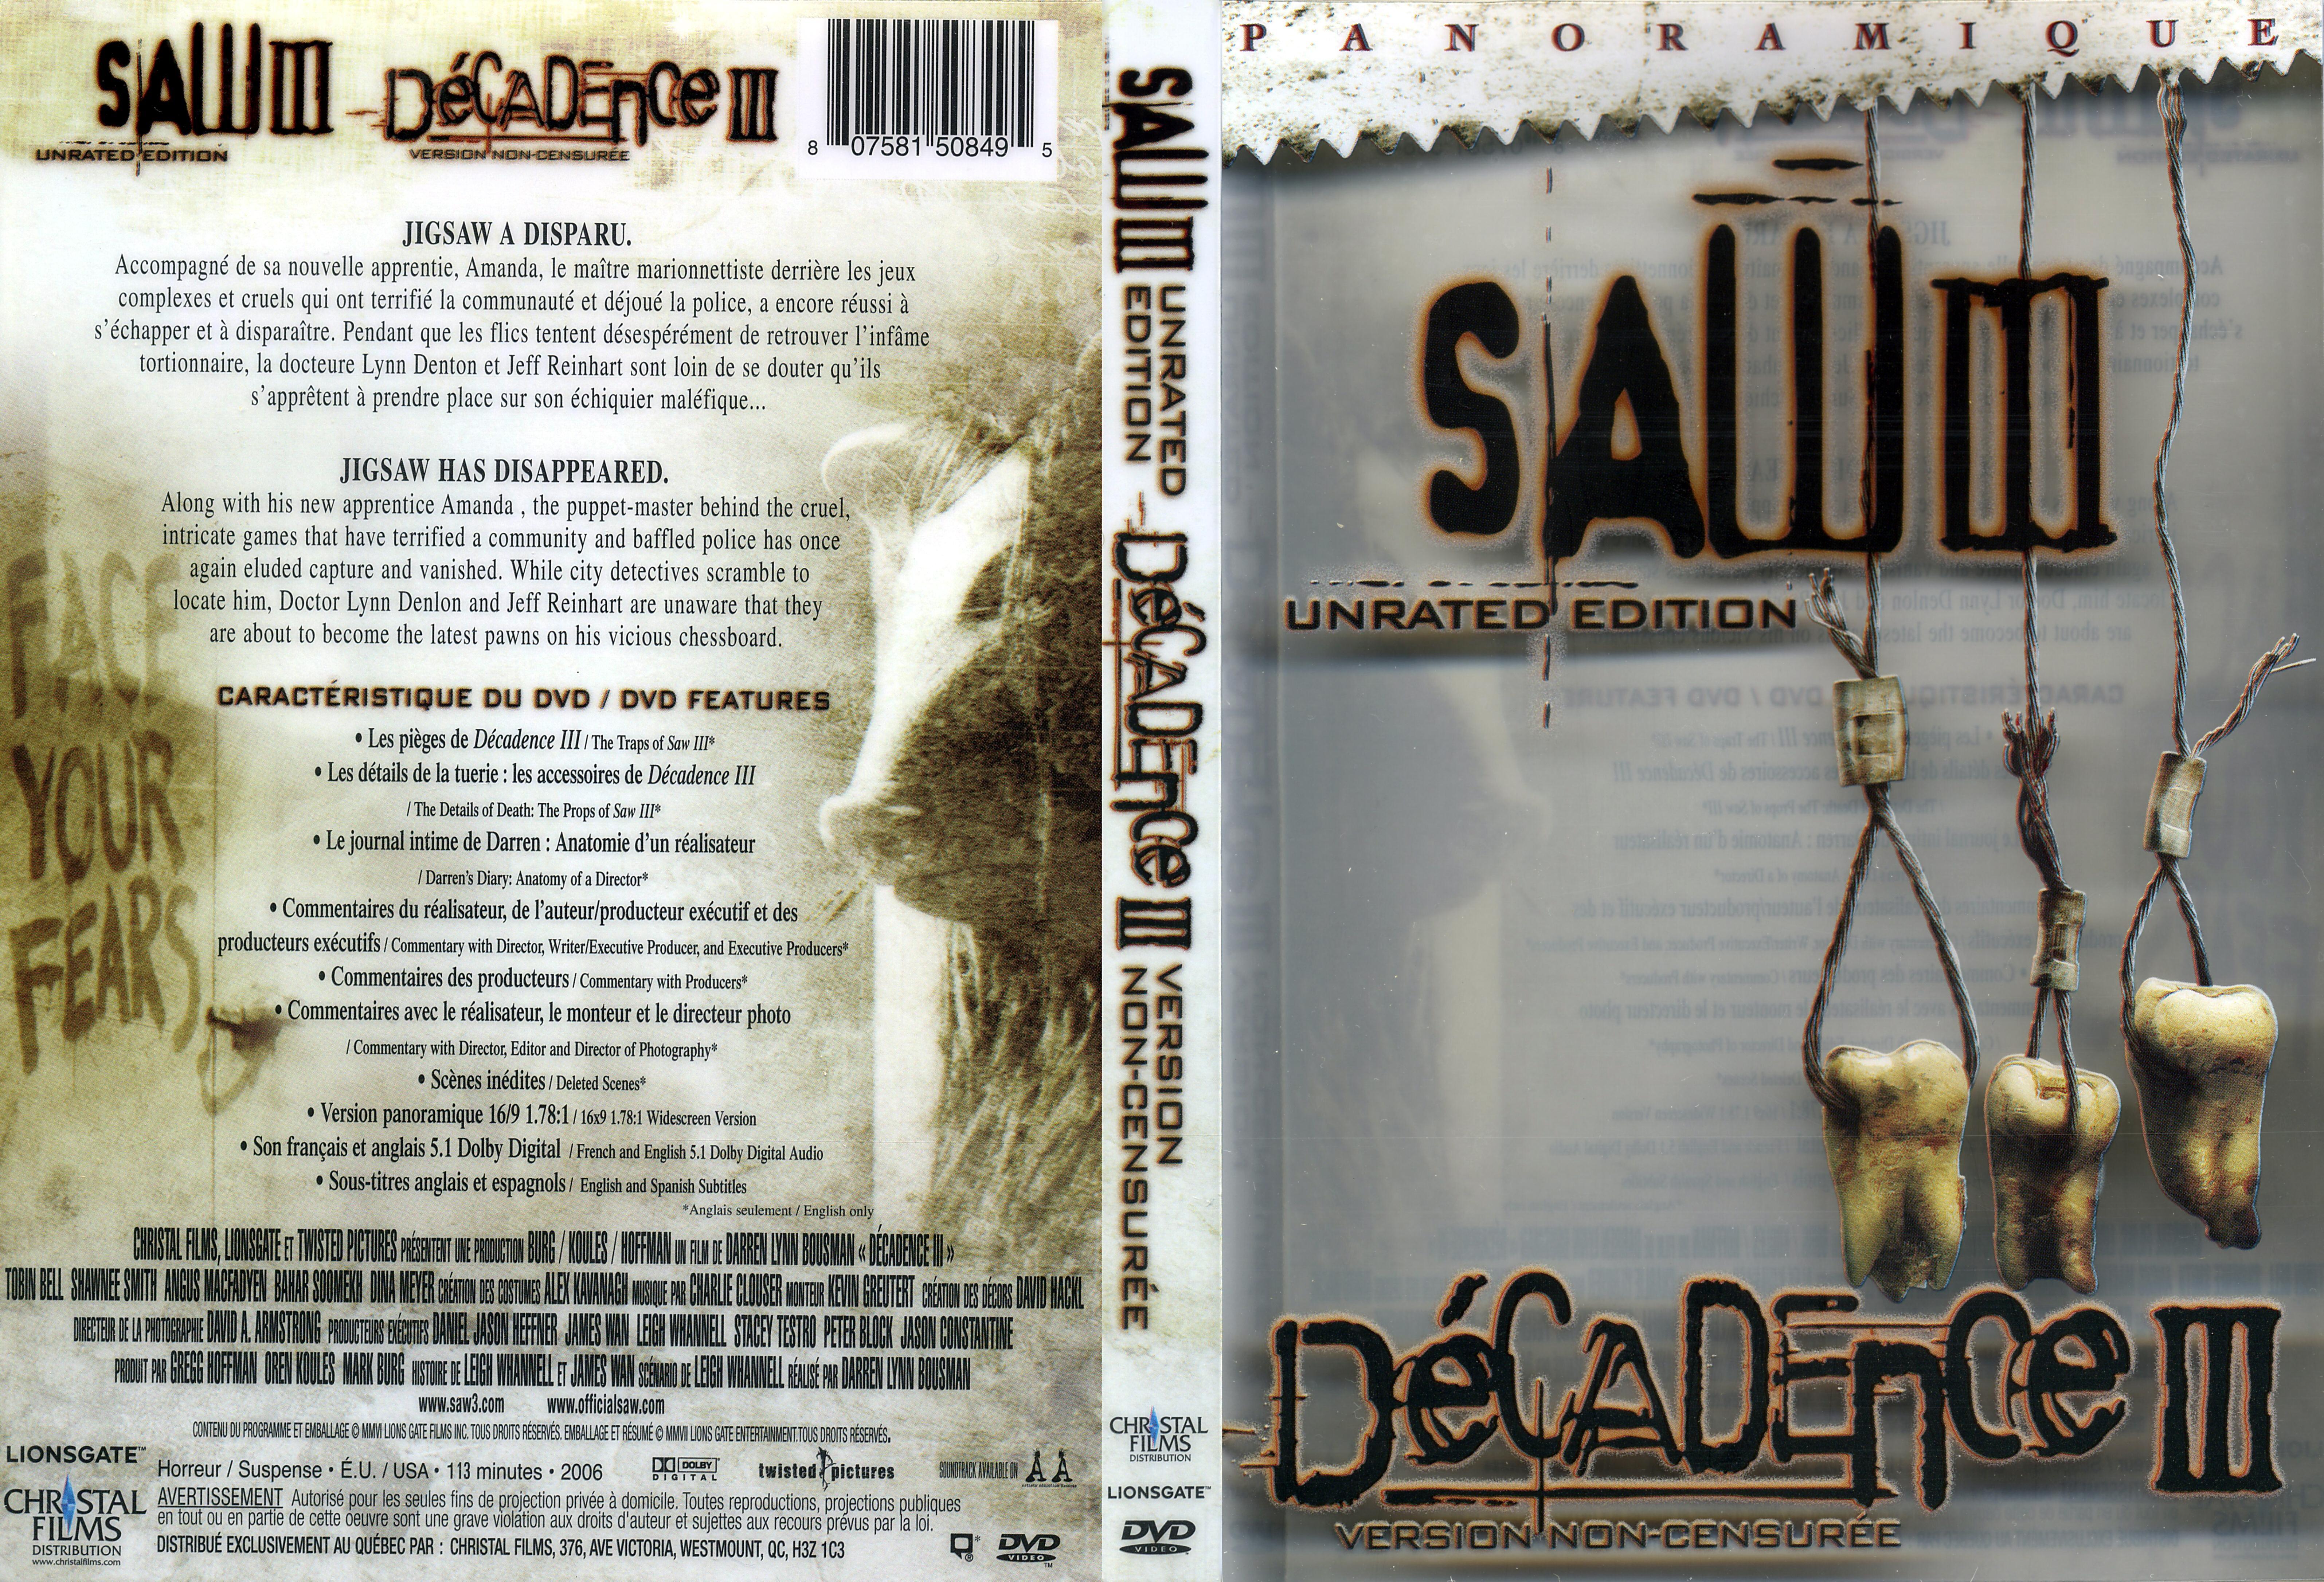 Jaquette DVD Dcadence 3